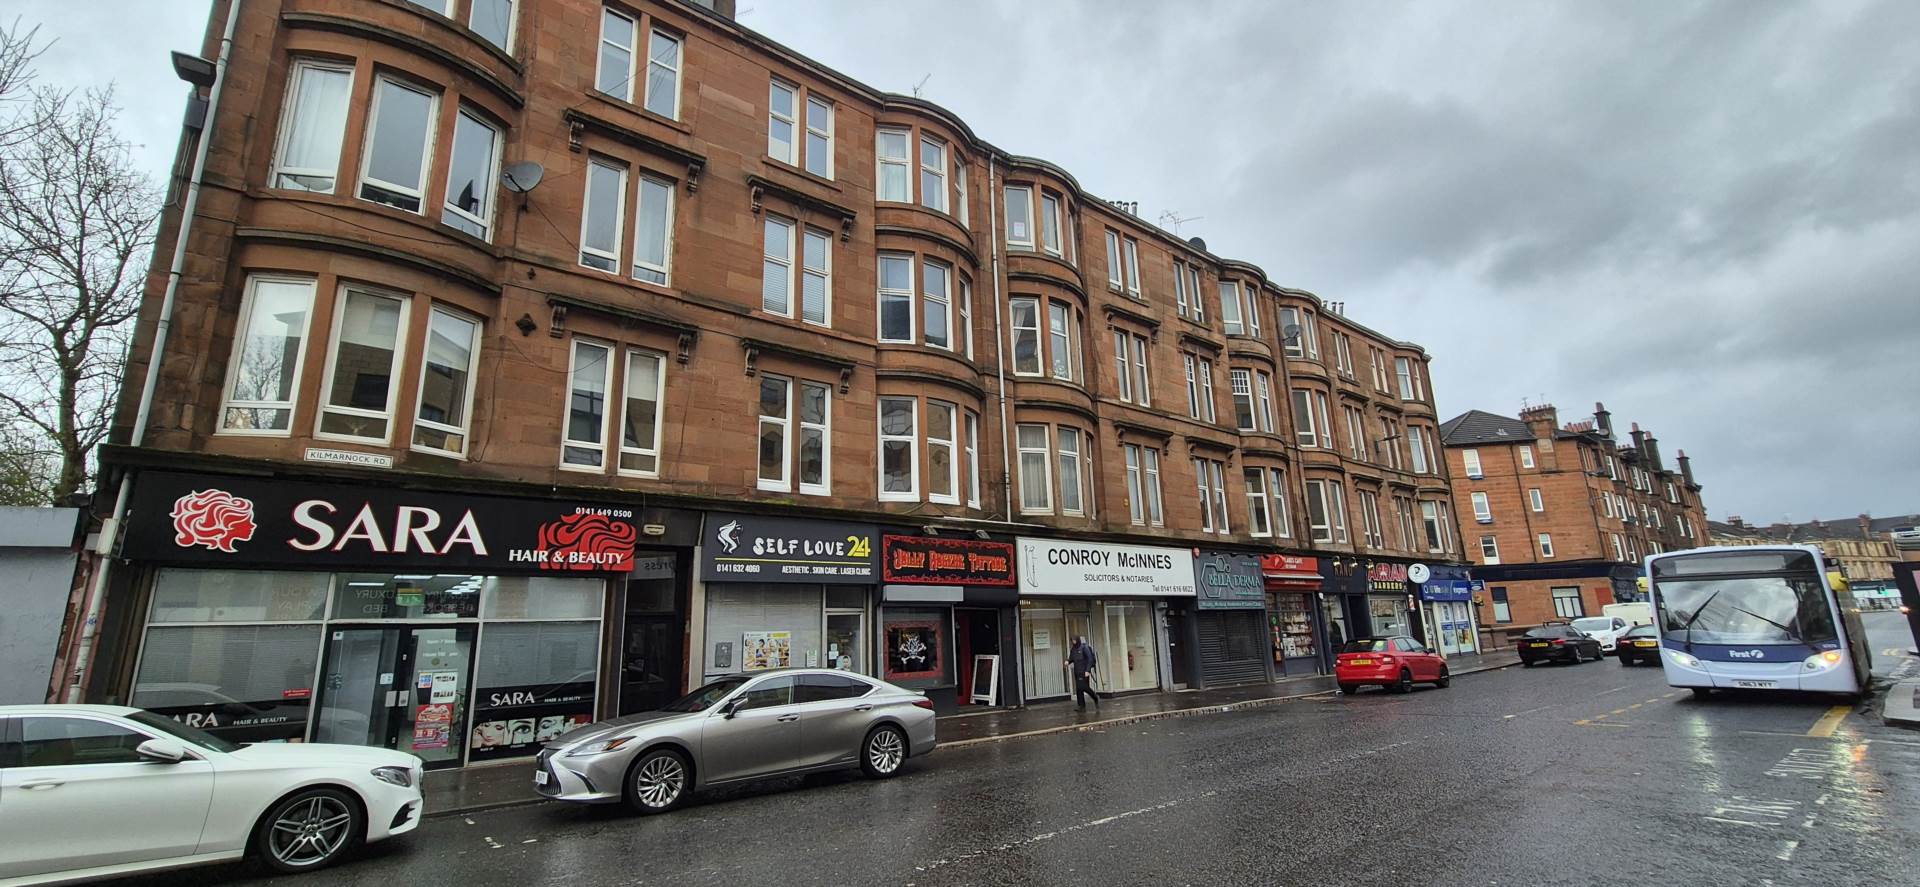 2 bed Flat for rent in Glasgow. From The Property Store